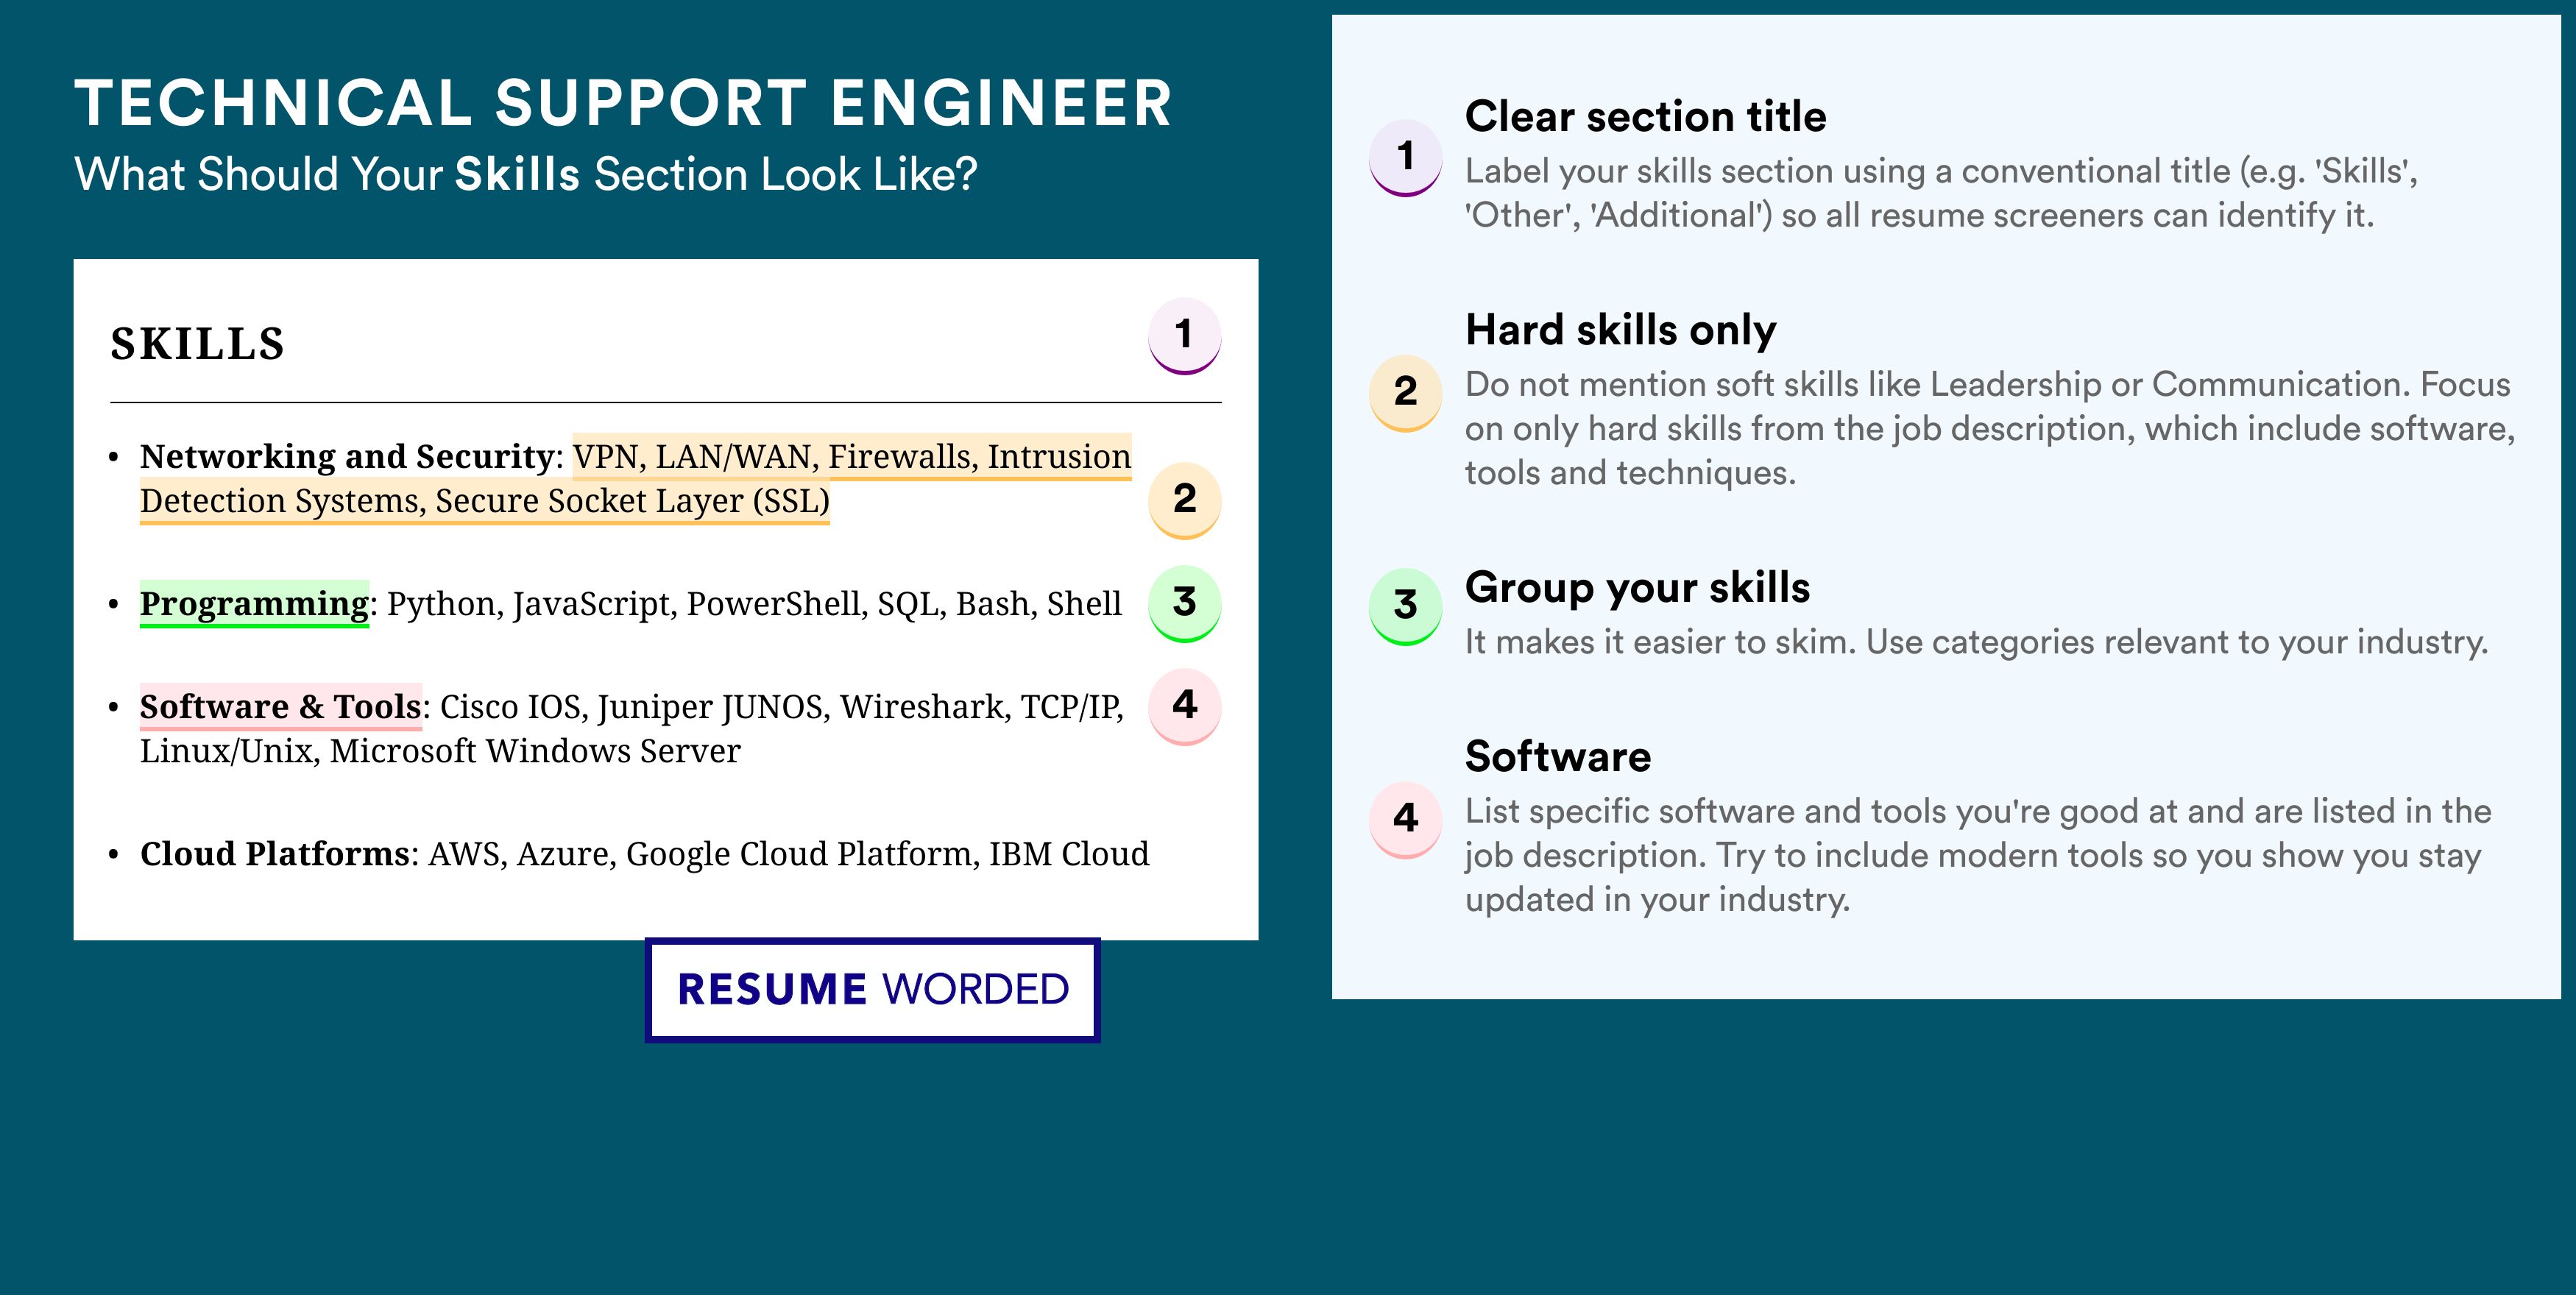 How To Write Your Skills Section - Technical Support Engineer Roles